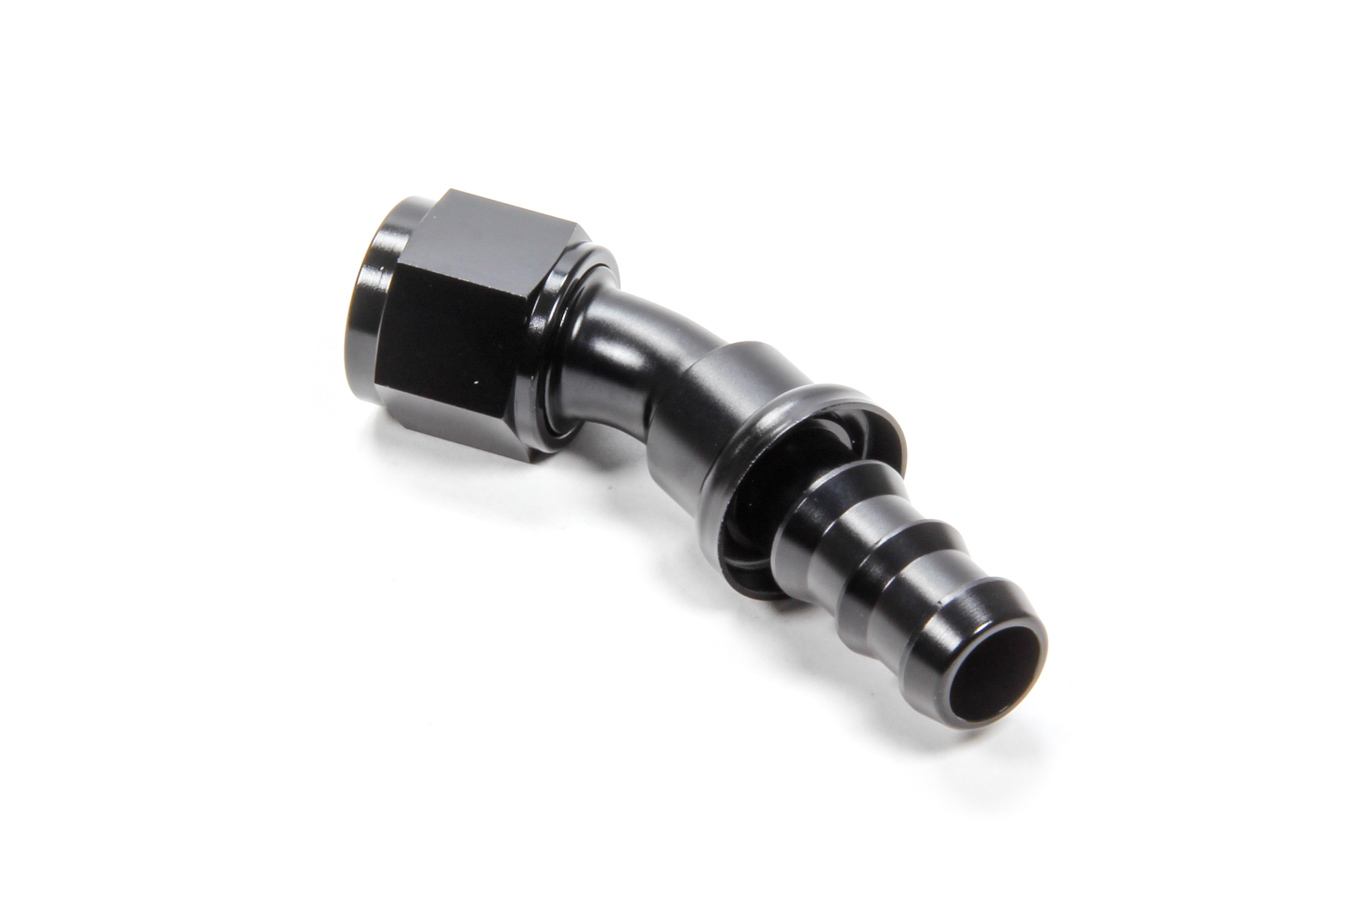 Triple X Race Components HF-13010-BLK Fitting, Hose End, 30 Degree, 10 AN Hose Barb to 10 AN Female, Aluminum, Black Anodized, Each